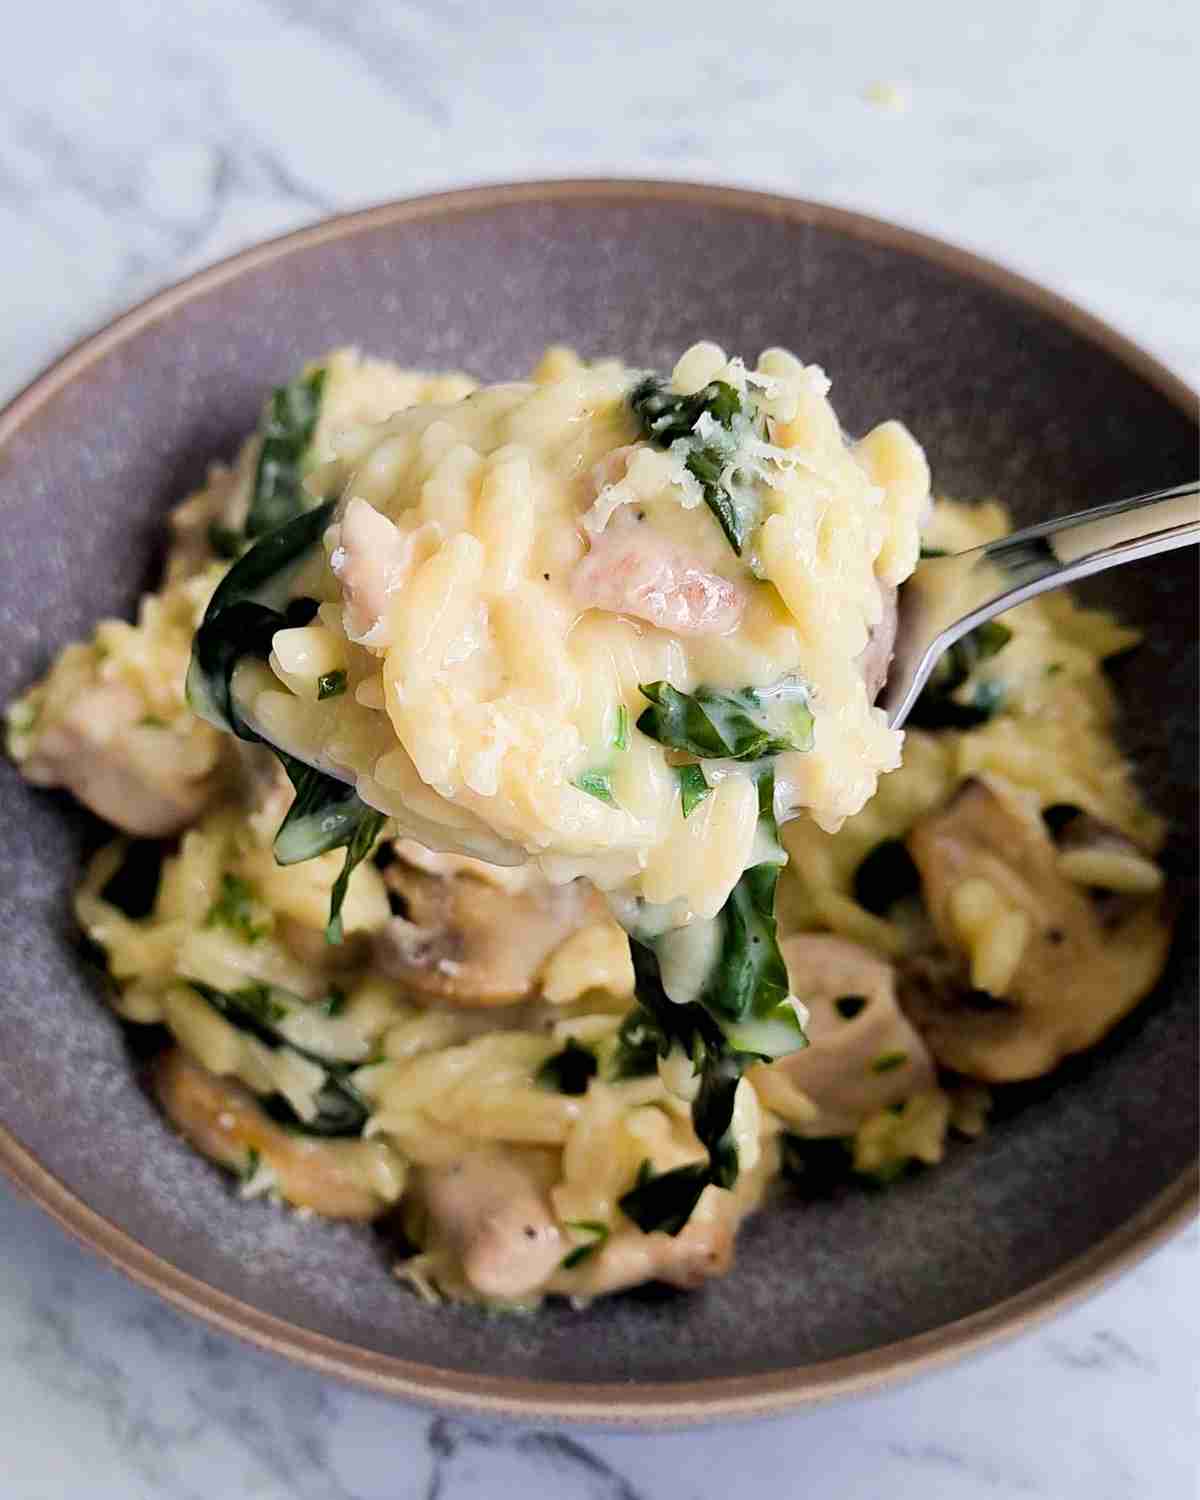 A heaped spoonful of creamy pasta over a bowl